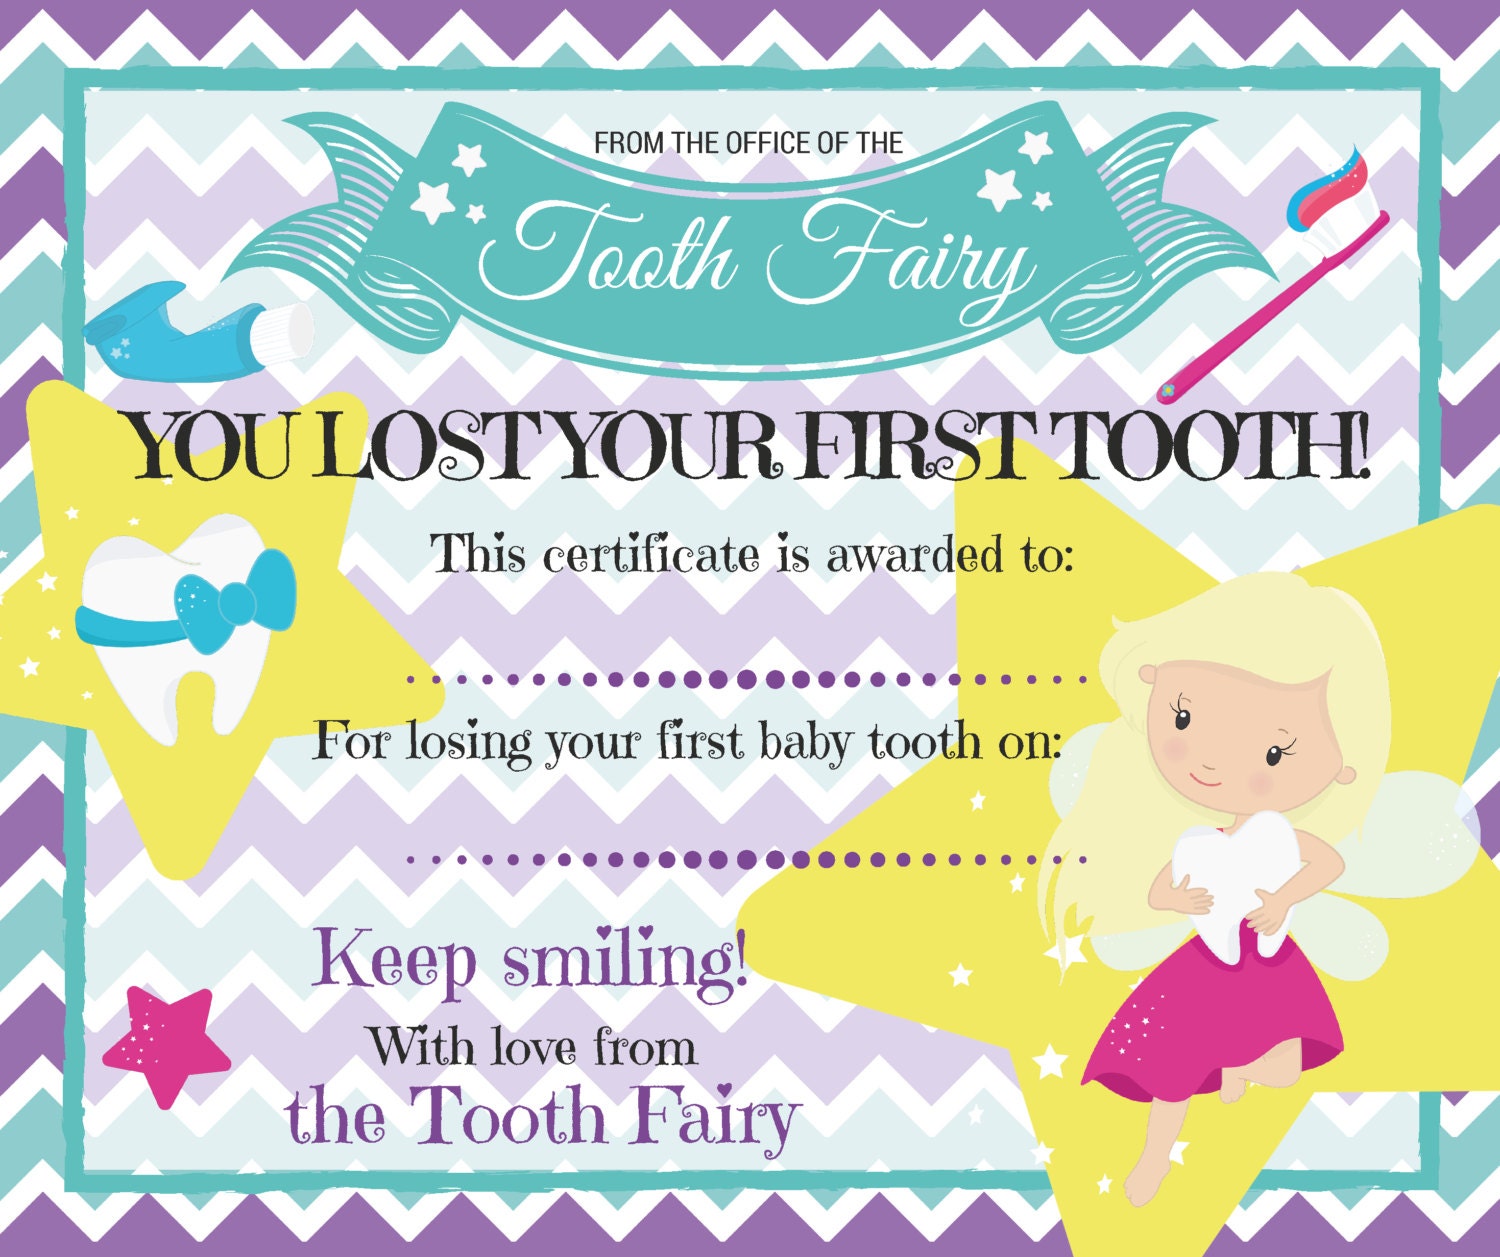 tooth-fairy-certificate-for-losing-first-baby-tooth